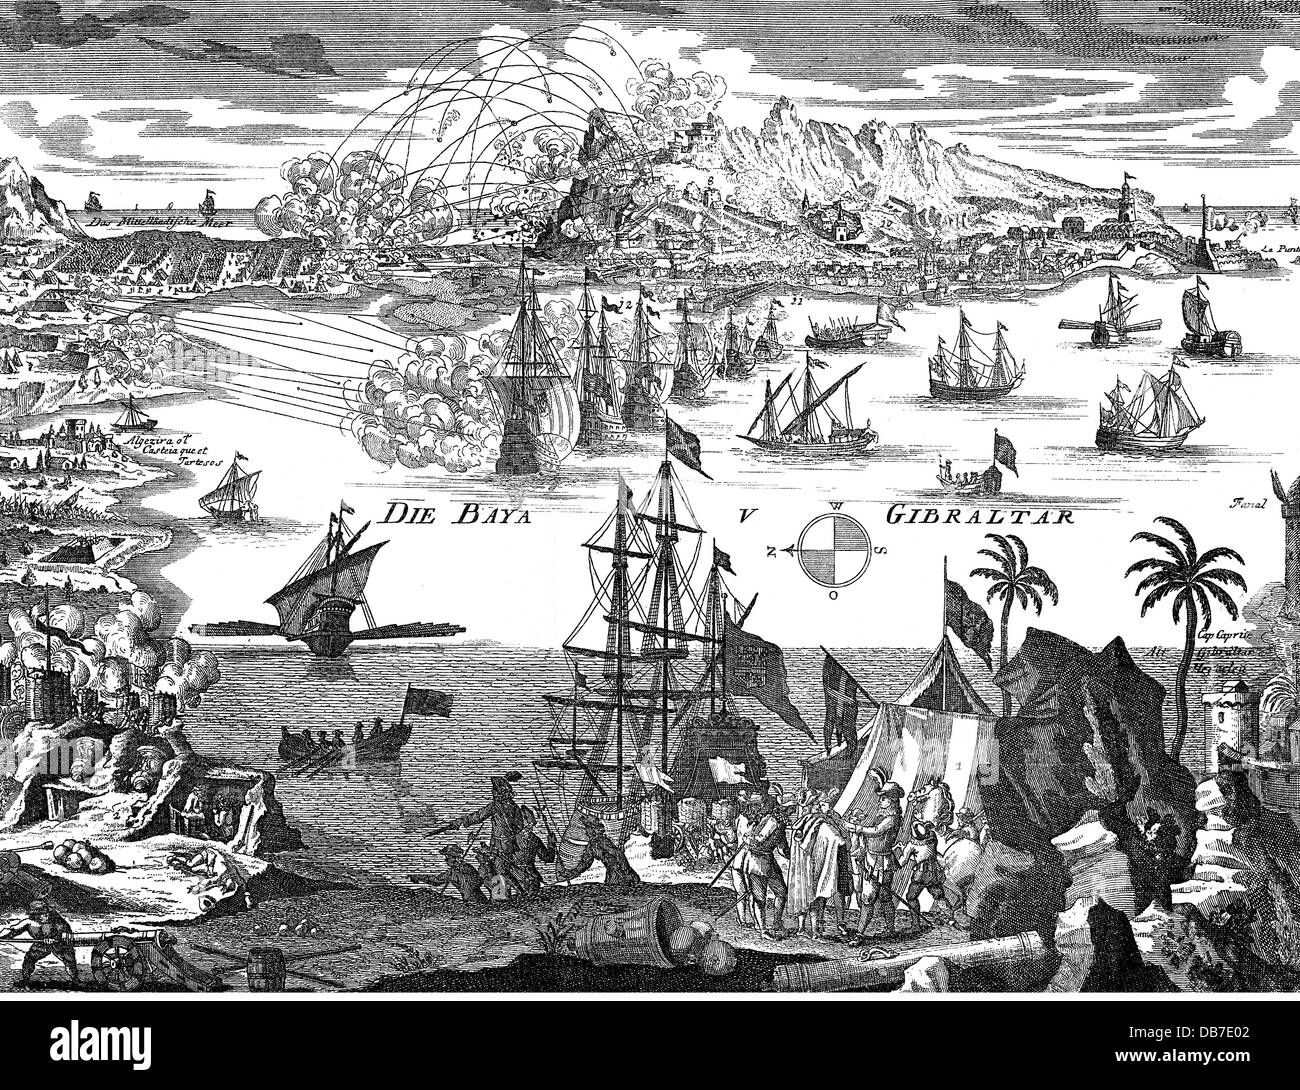 Anglo-Spanish War 1727 - 1729, siege of Gibraltar by the Spanish, 11.2. - 12.6.1727, contemporary copper engraving, Anglo - Spanish war, British fleet, Royal Navy, artillery, fortress, fortresses, Kingdom of Spain, Great Britain, bay, historic, historical, 18th century, people, Artist's Copyright has not to be cleared Stock Photo